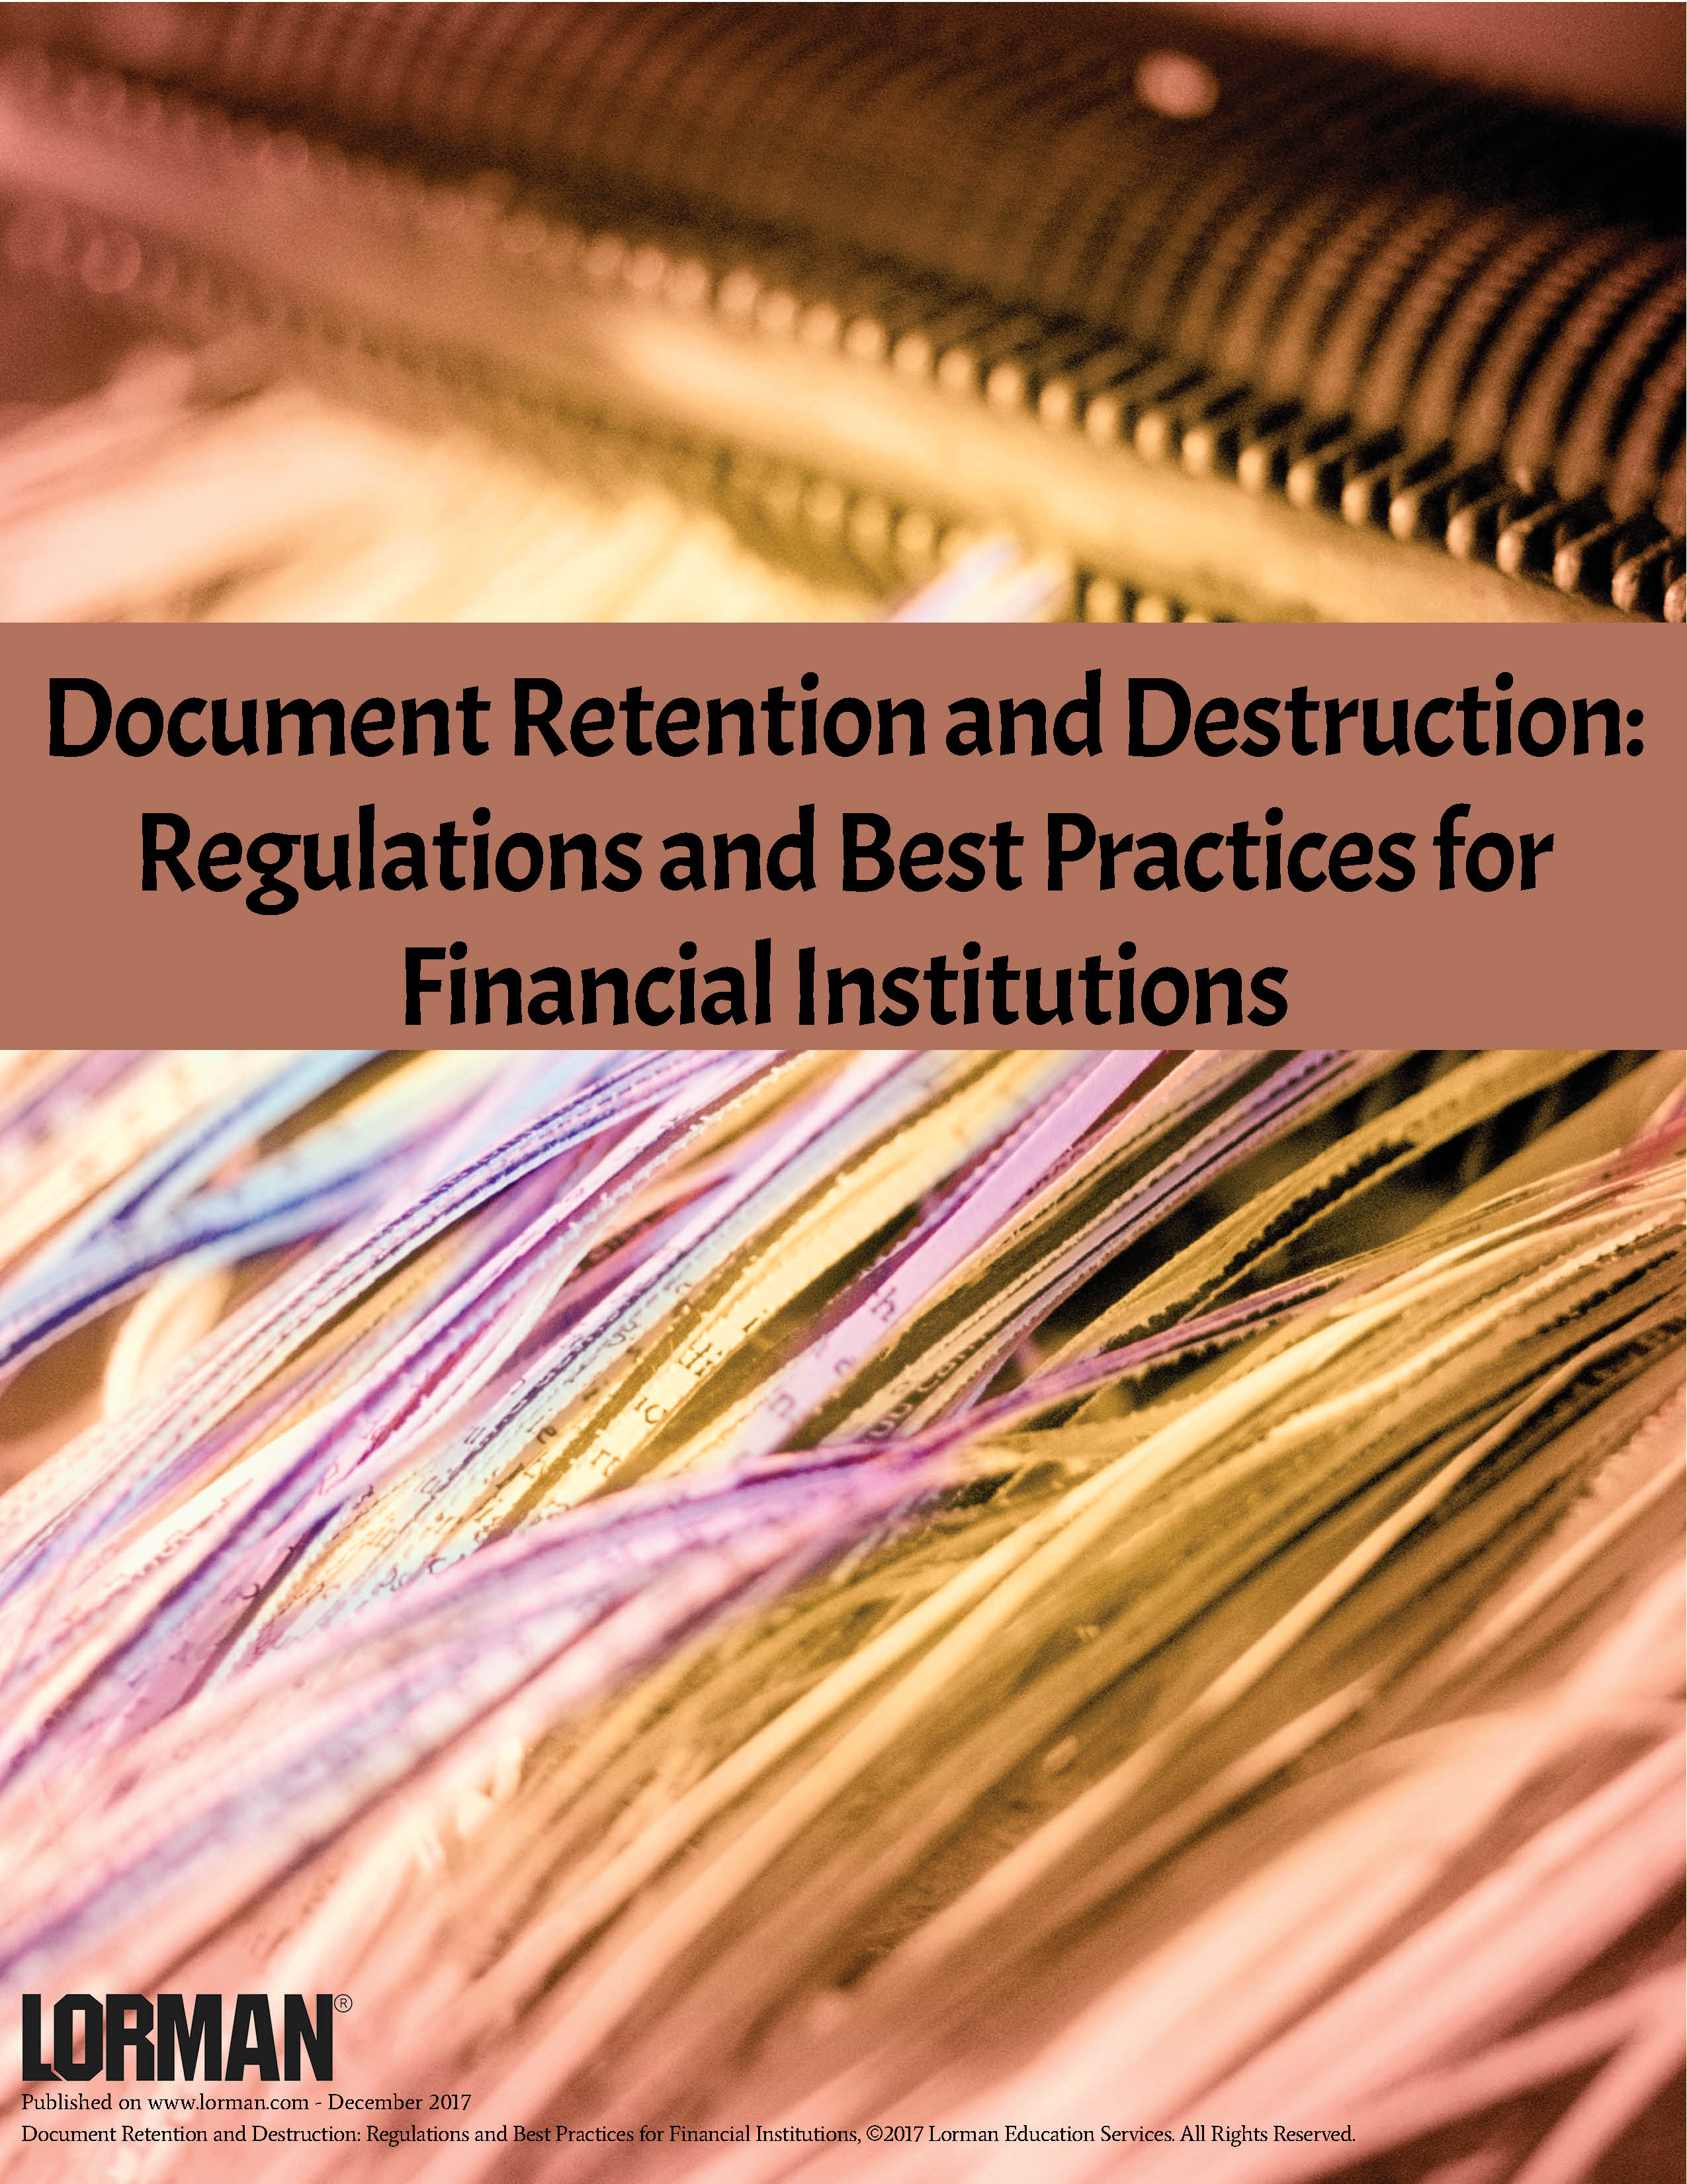 Document Retention and Destruction: Regulations and Best Practices for Financial Institutions